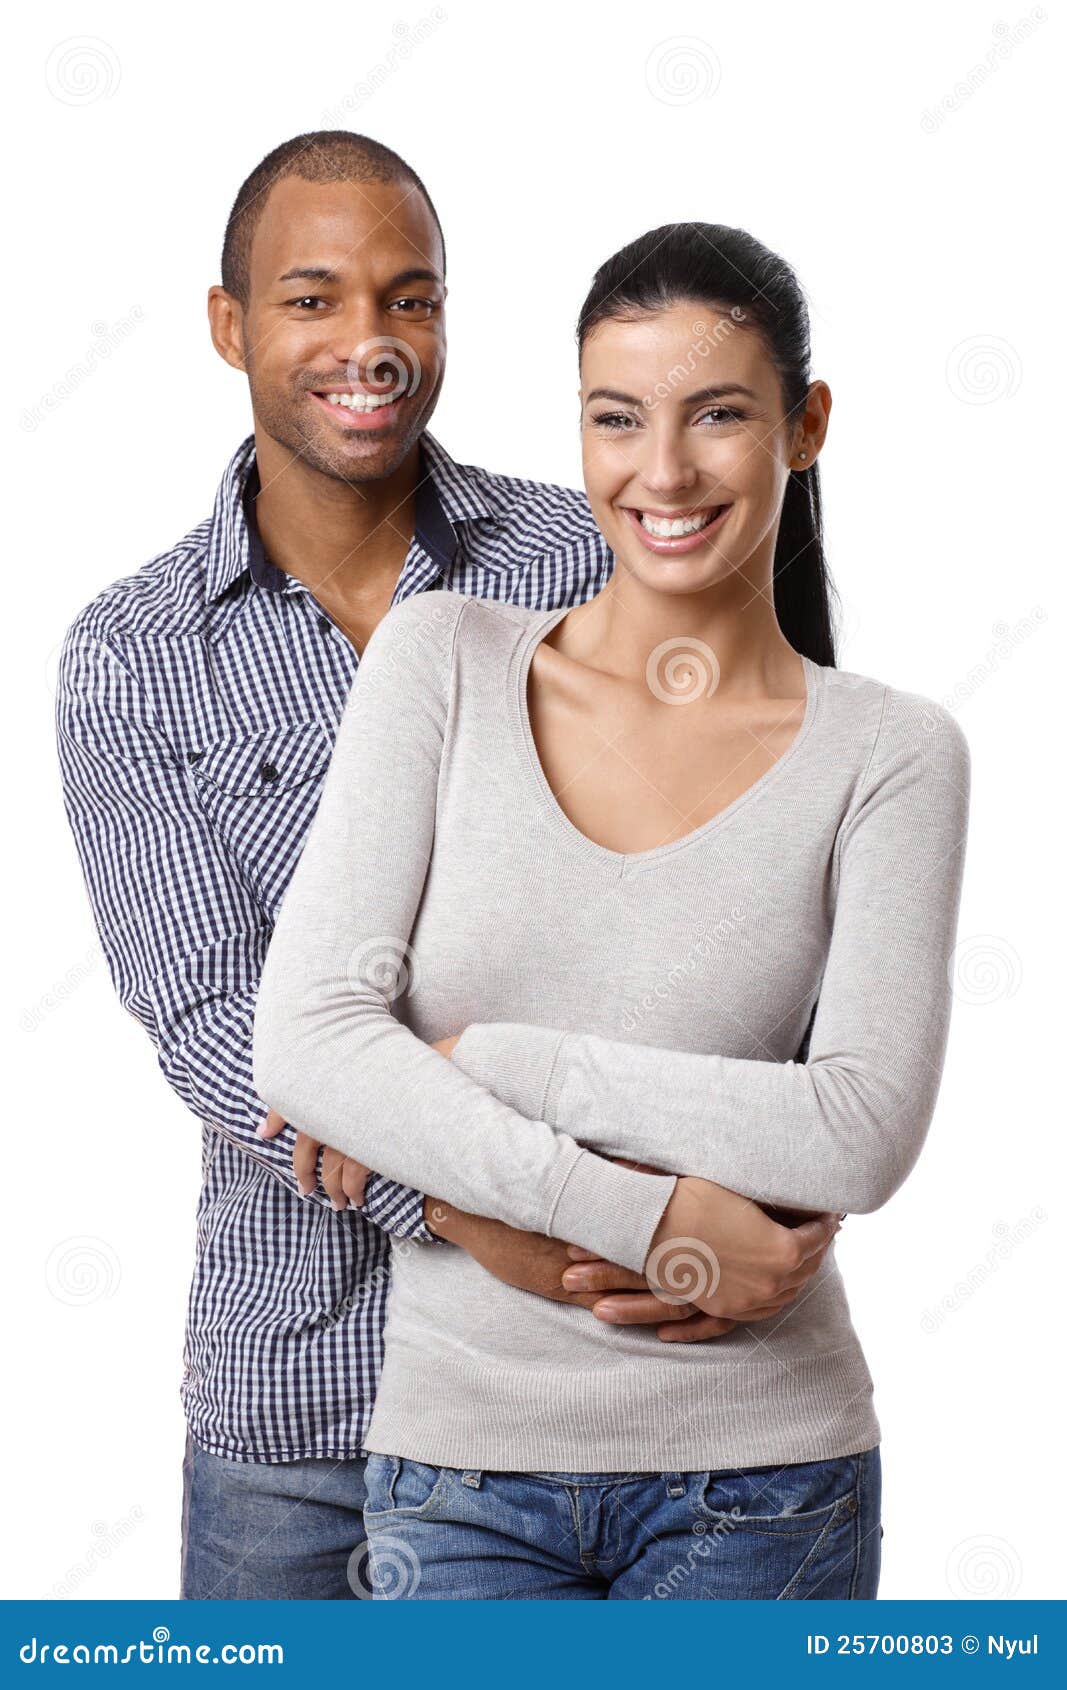 Portrait Of A Mixed Couple On White, Stock Photo - Image 